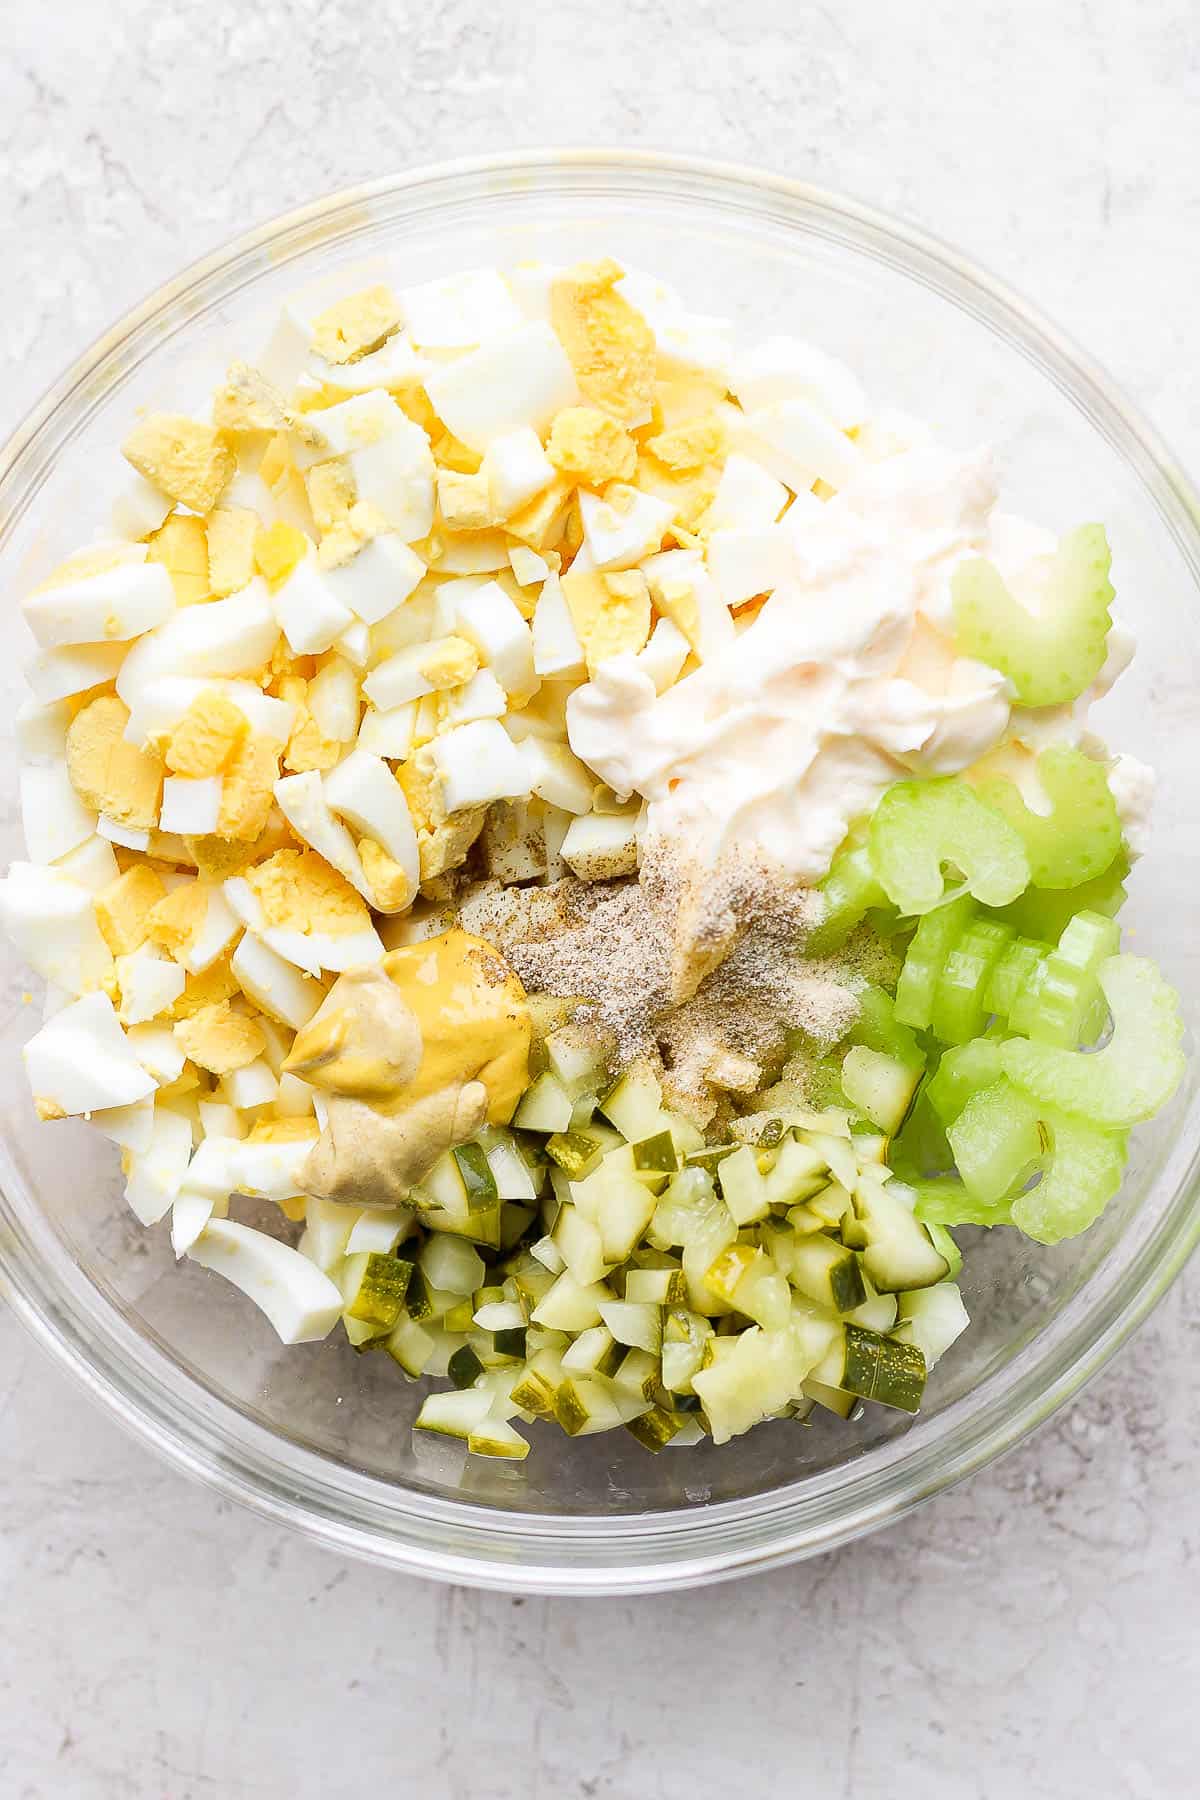 All of the egg salad ingredients in one glass bowl.